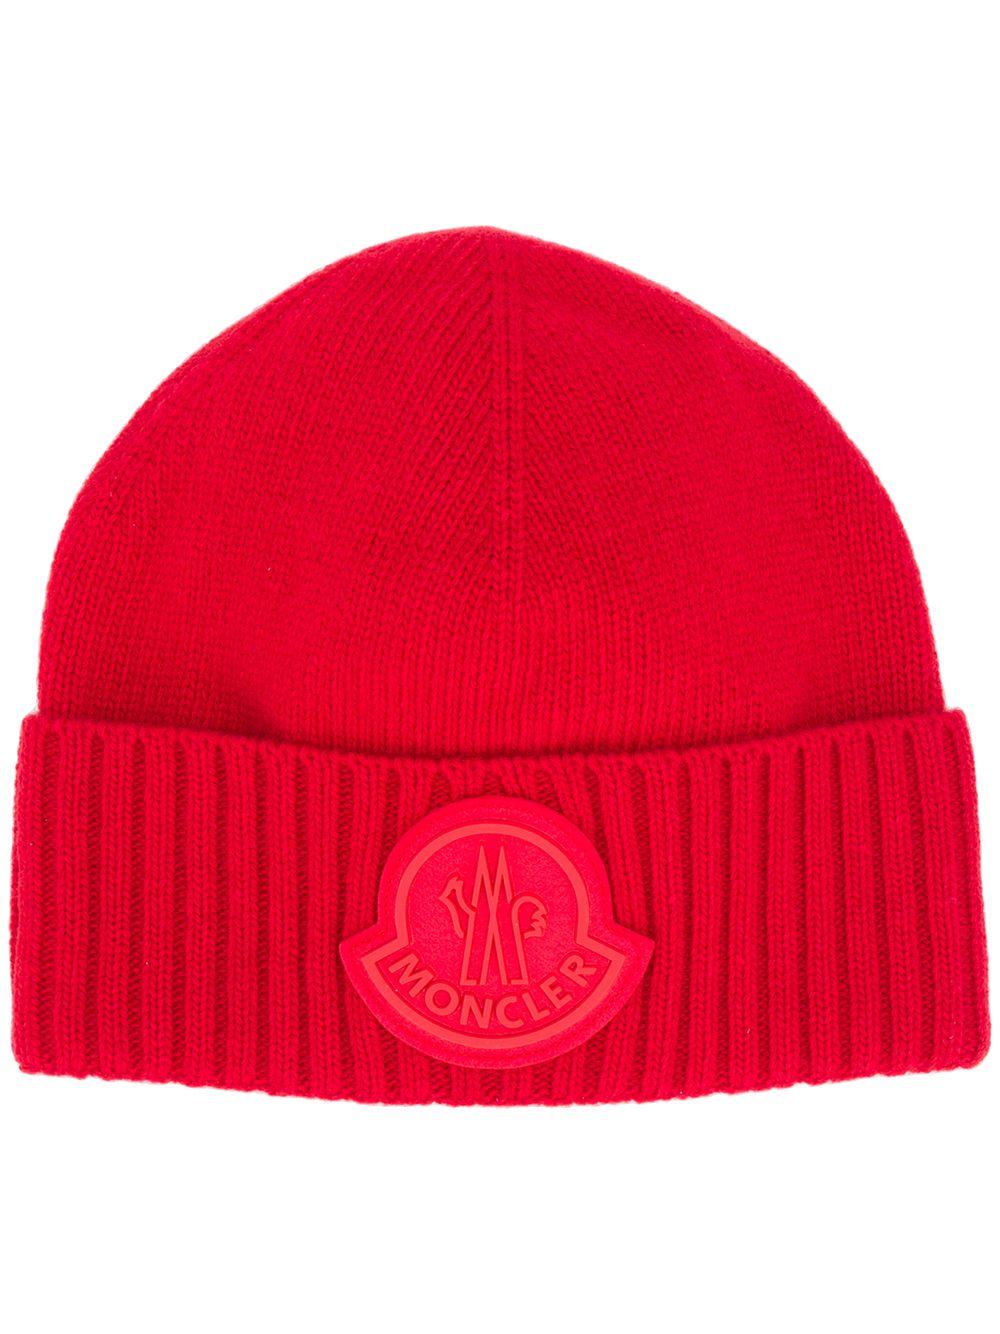 Moncler Wool Ribbed Large Logo Beanie in Red for Men - Lyst